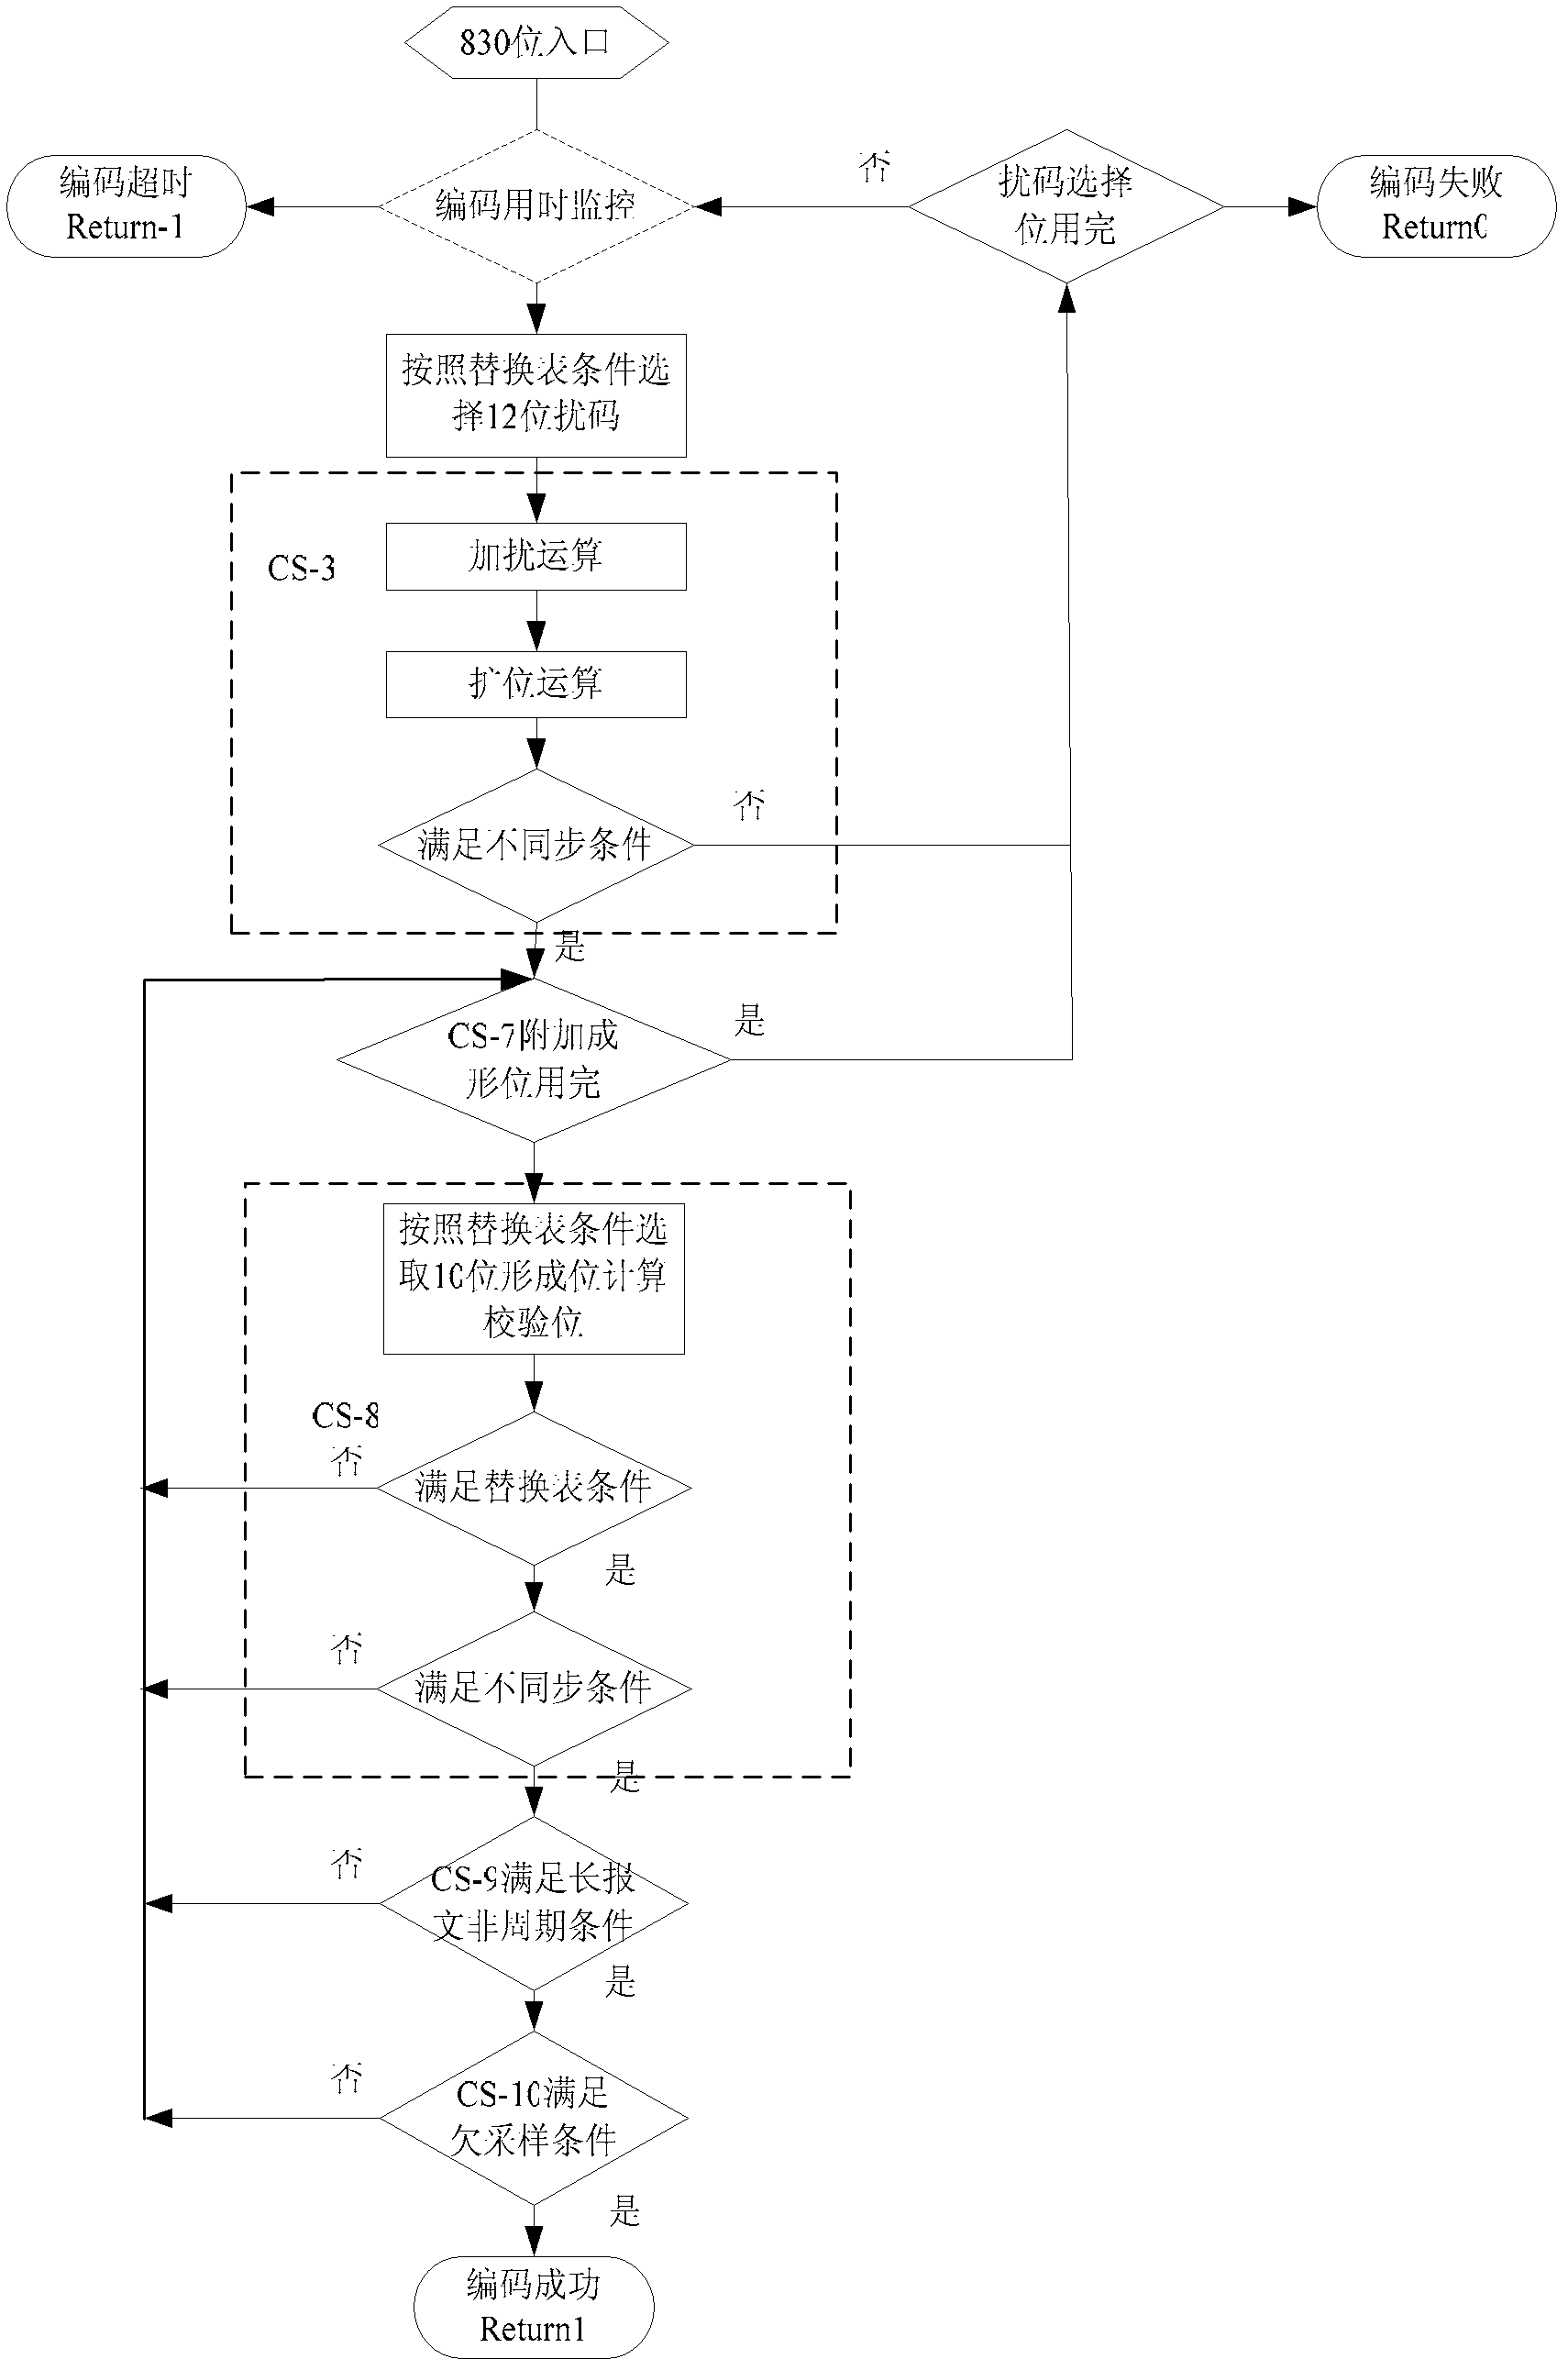 Method for generating and sending transponder messages in real time, as well as train control center device and system